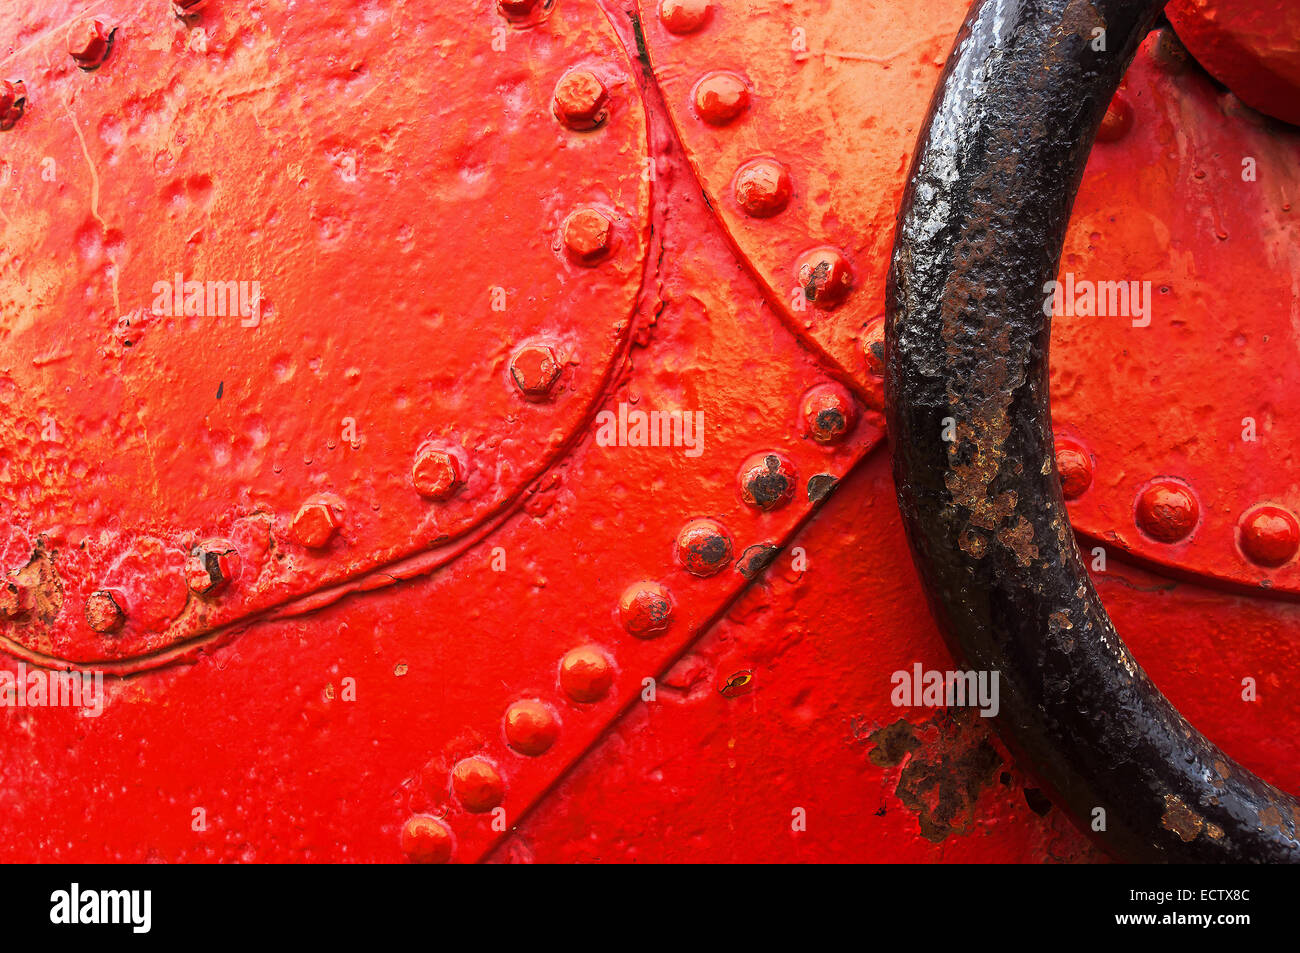 abstraction with close-up of spherical buoy Stock Photo